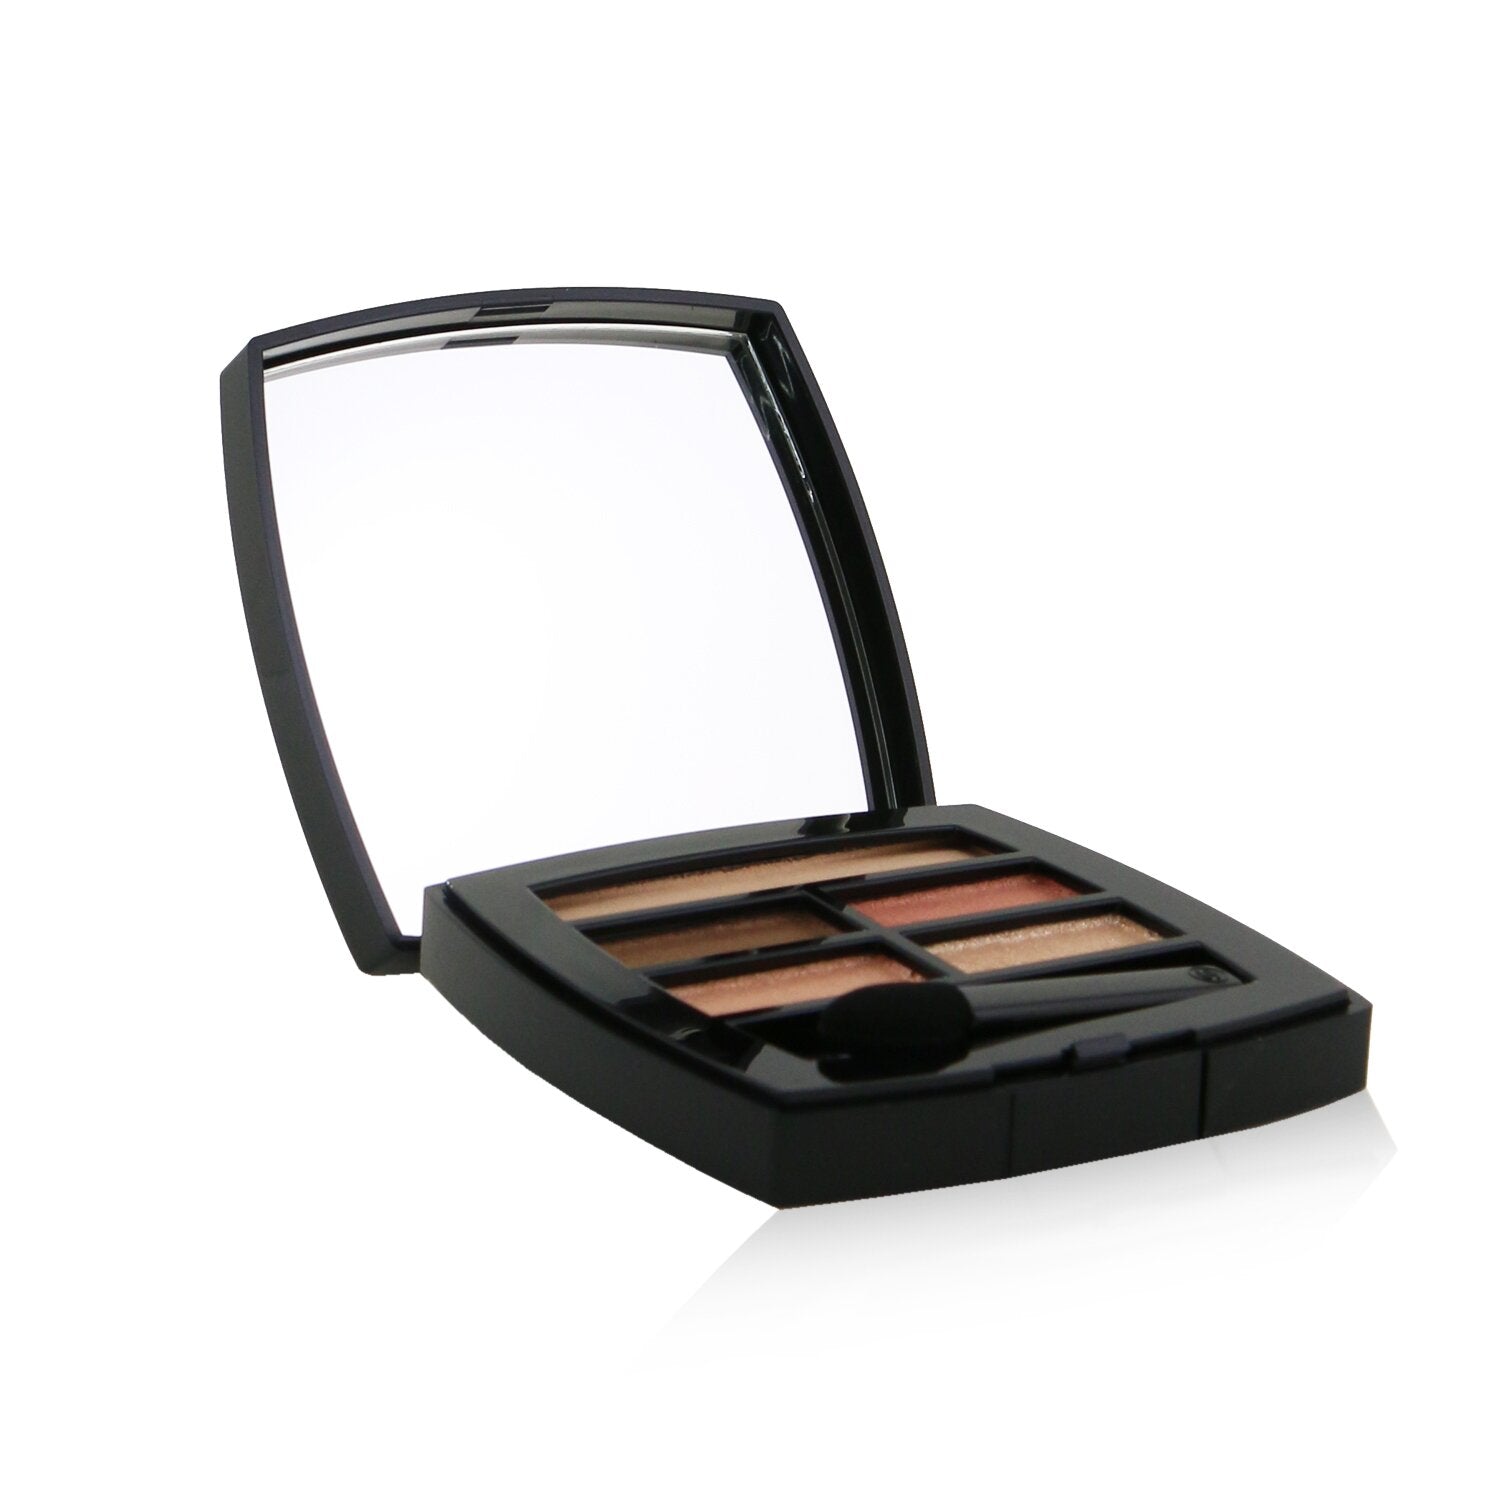 CHANEL LES BEIGES EYESHADOW PALETTE Healthy Glow Natural Eyeshadow Palette  - EYE PALETTE